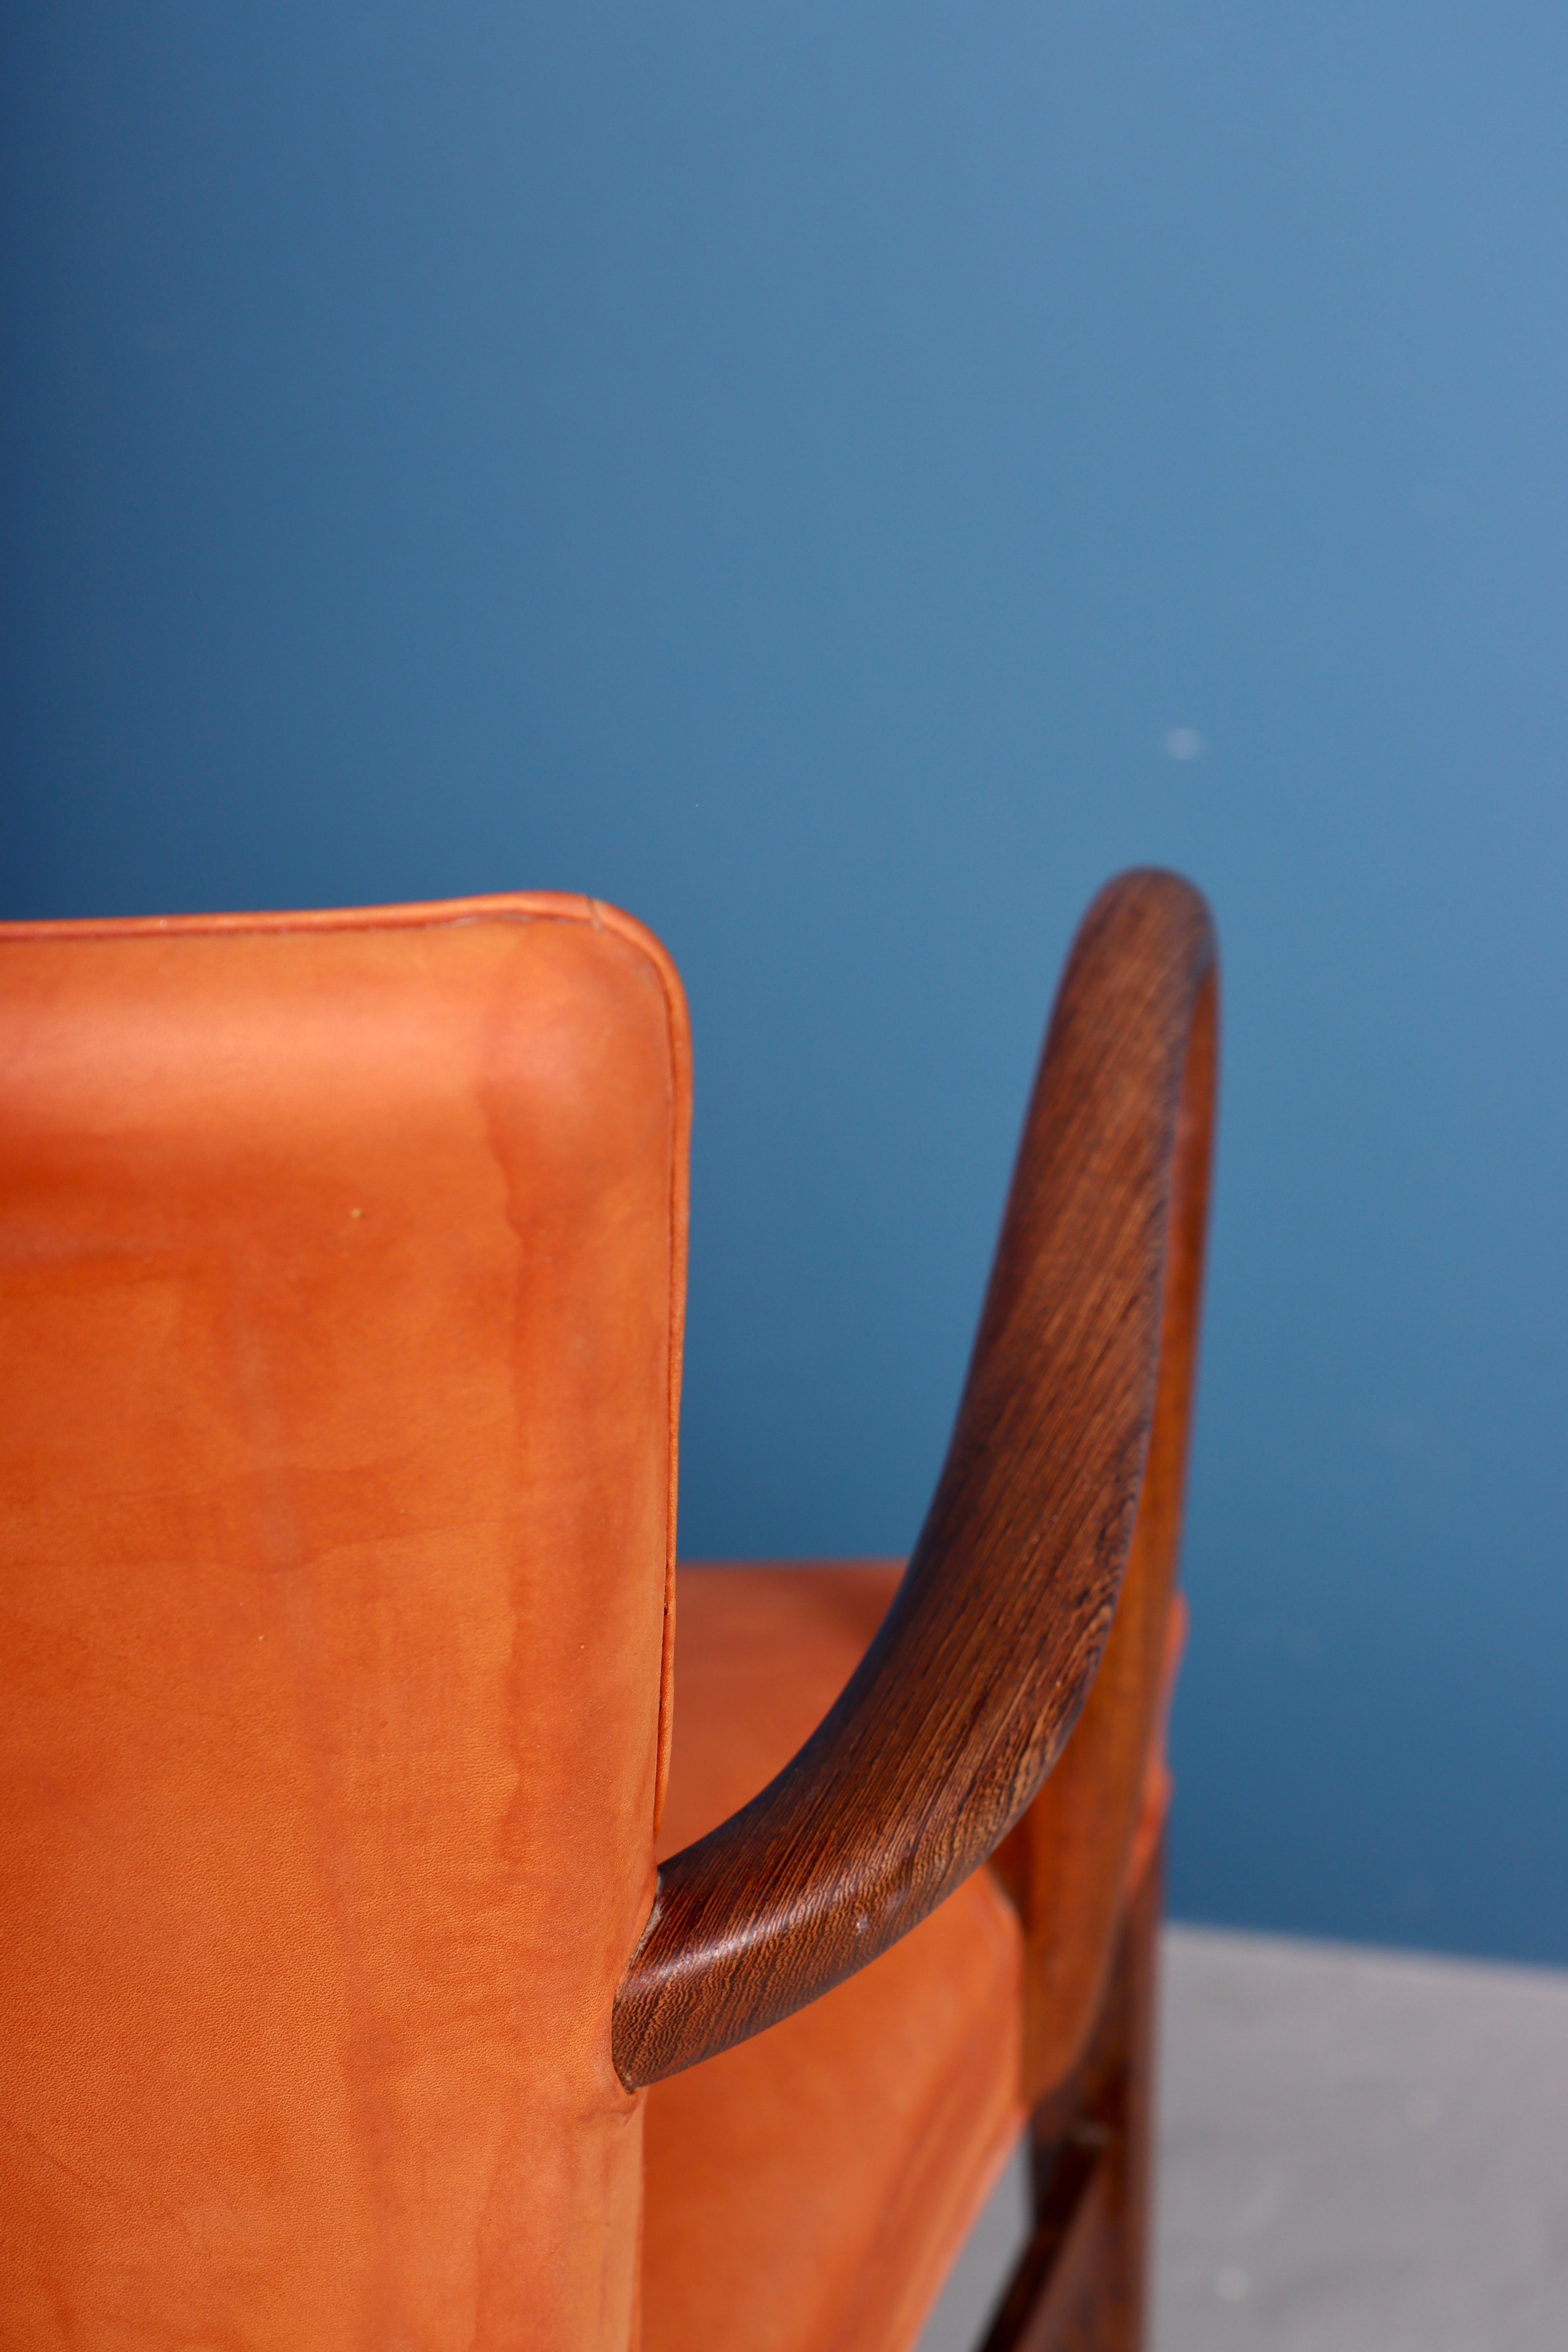 Mid-20th Century Rare Midcentury Armchair in Patinated Leather and Wenge, Danish Design, 1950s For Sale